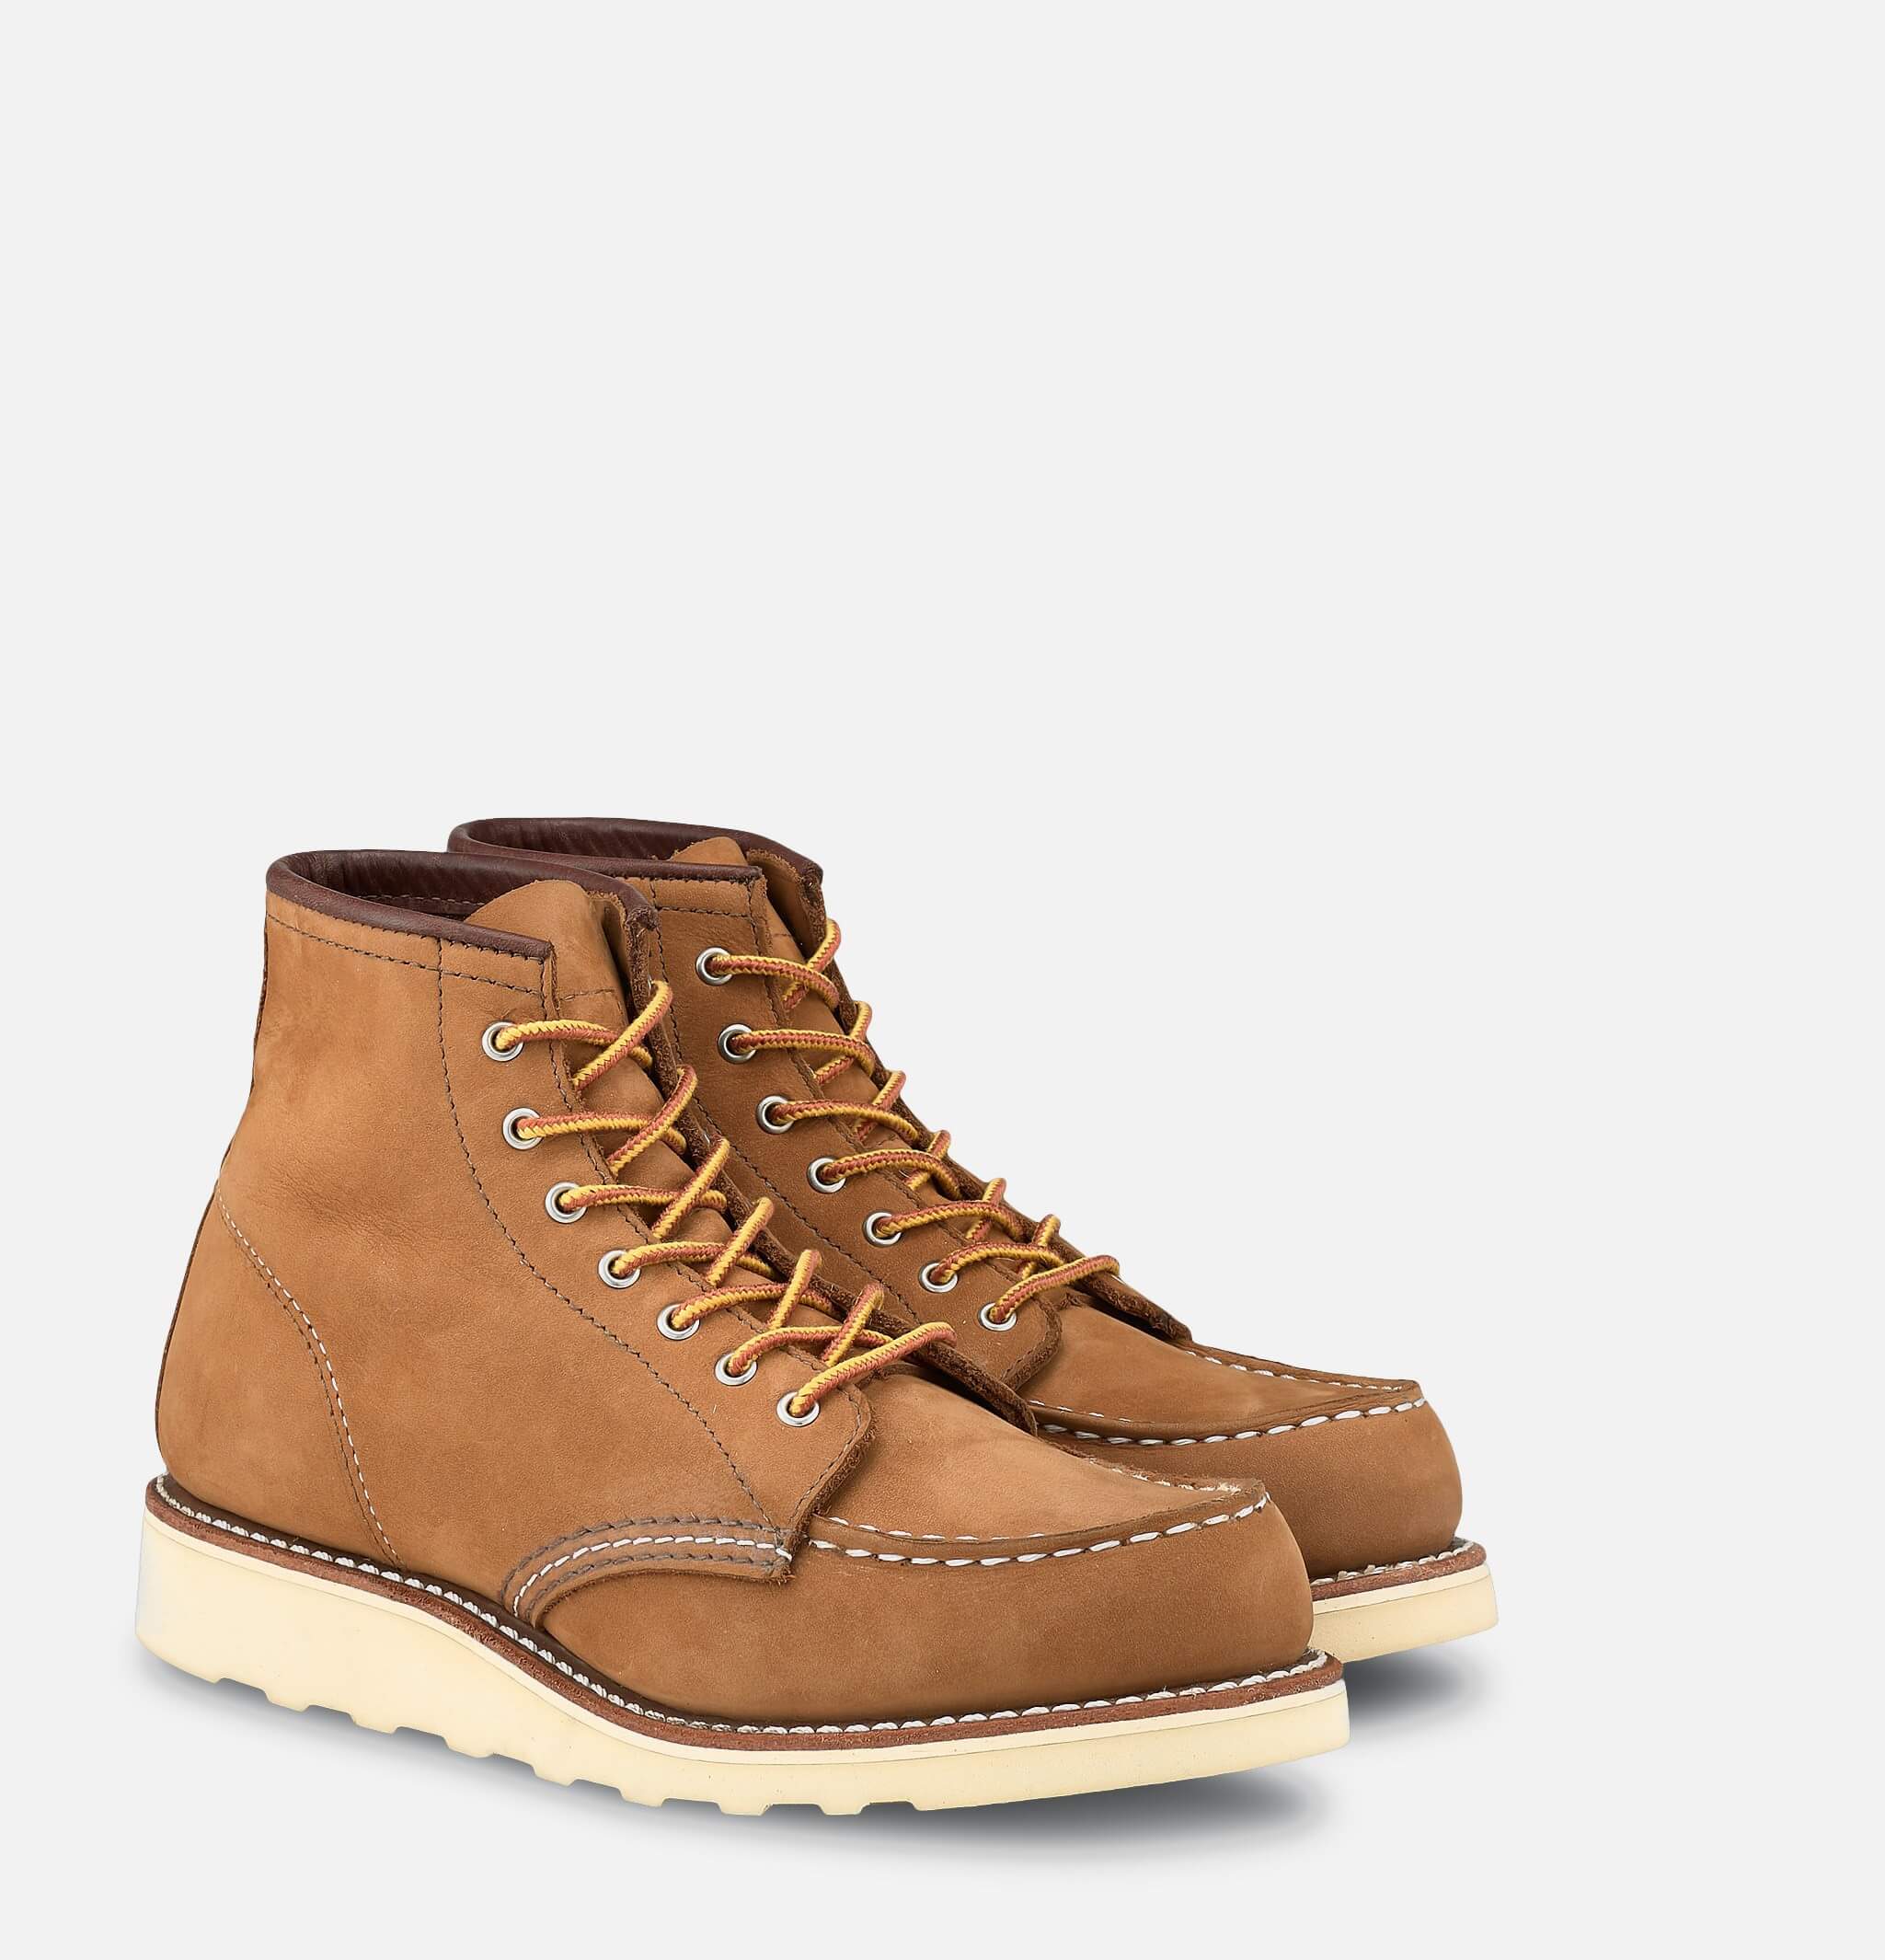 Red Wing Shoes Femme - 3372  Moc Toe Honey